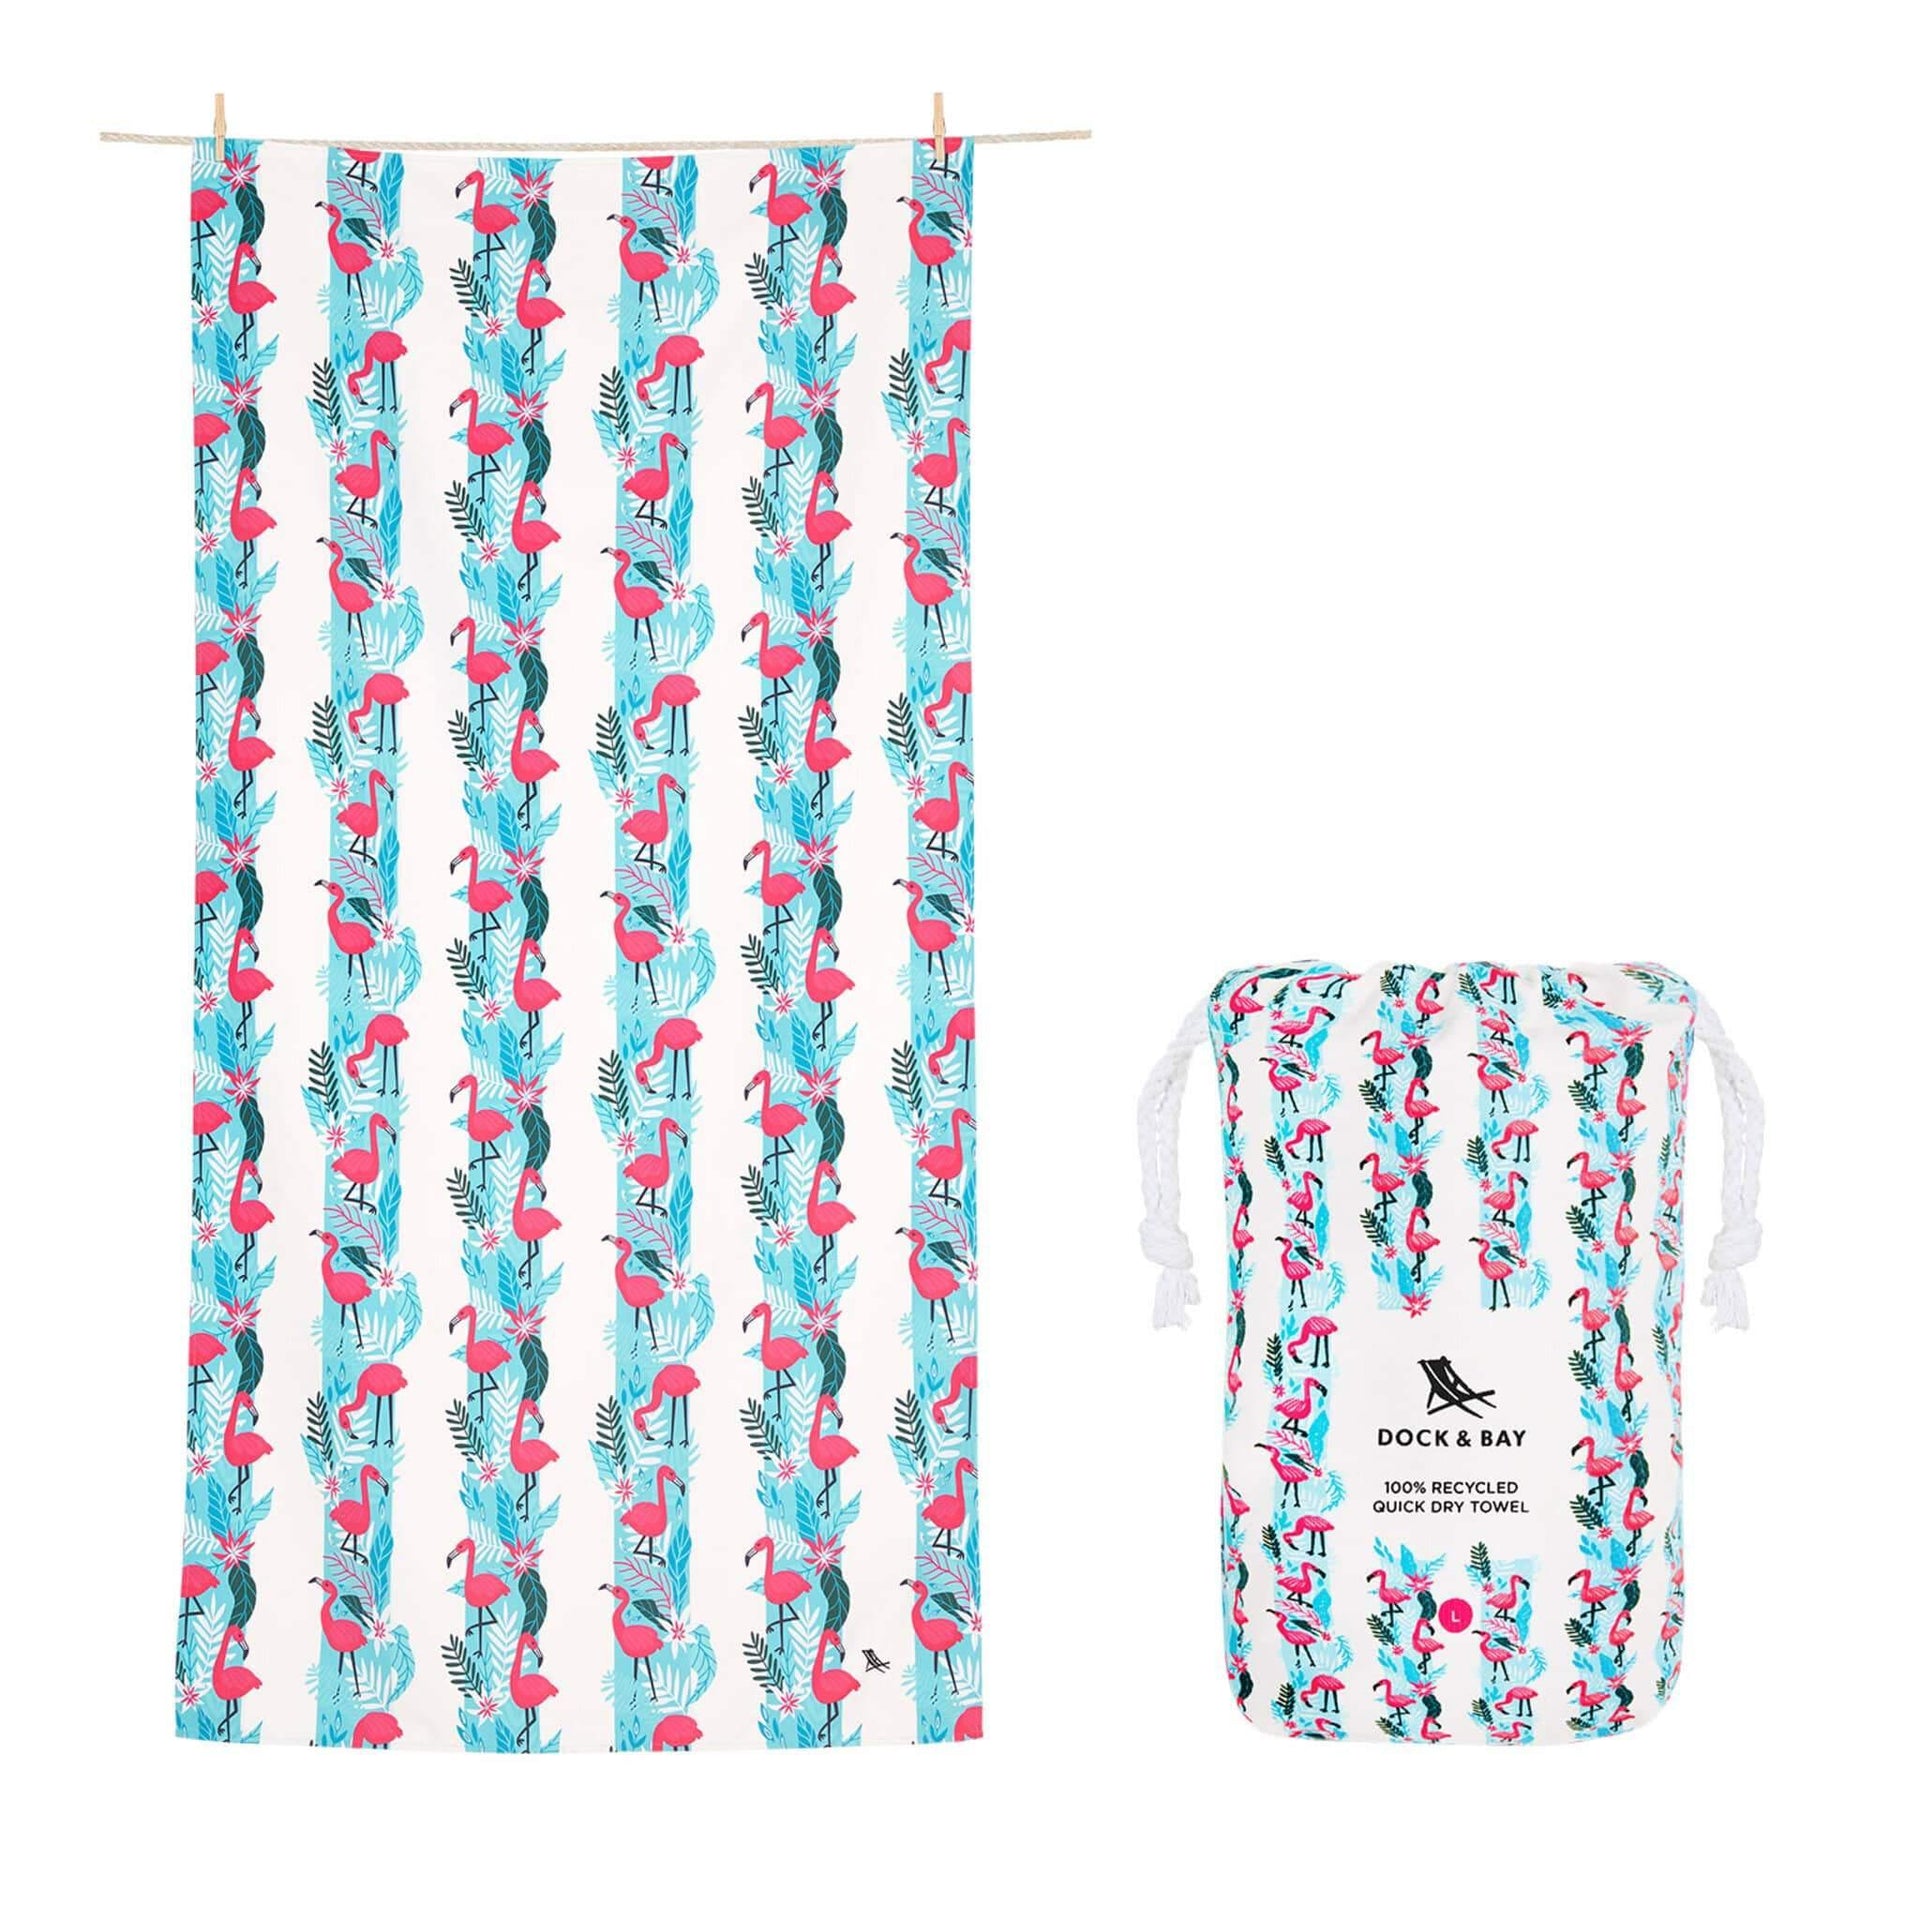 Dock & Bay | Beach Towel Jungle Collection L 100% Recycled - Upcycle Studio